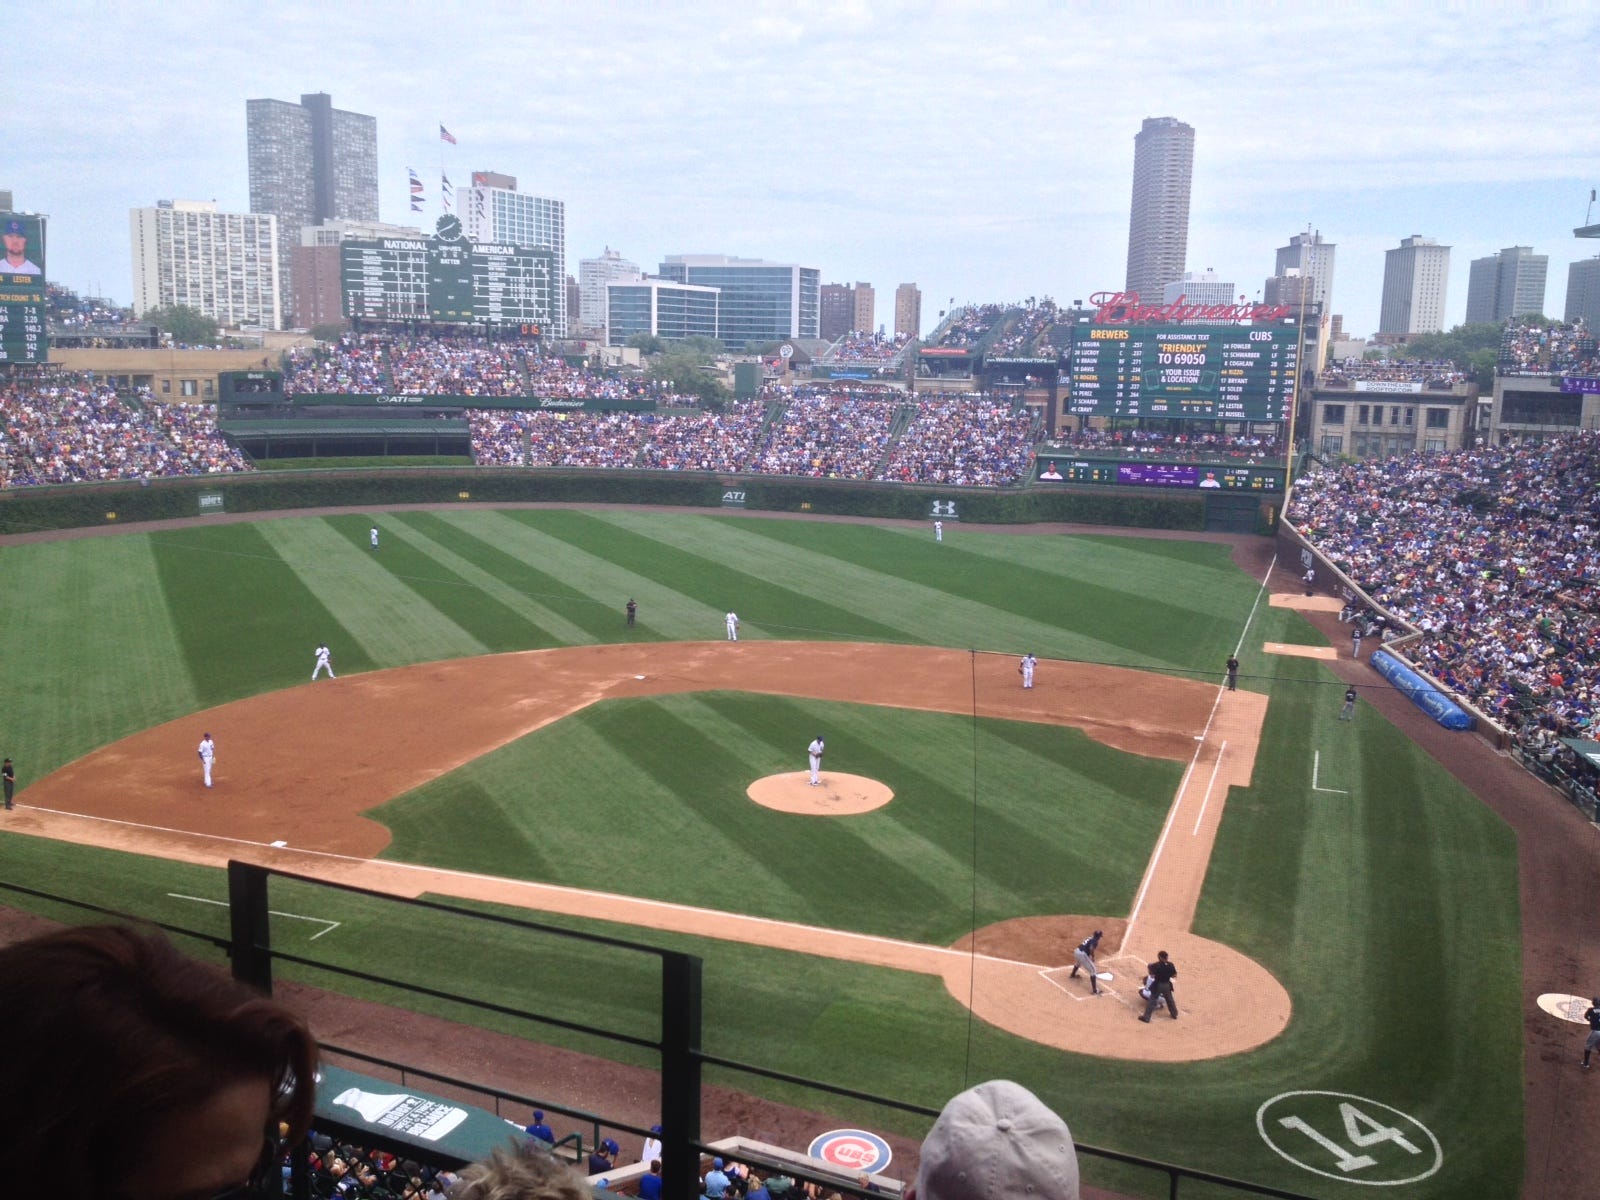 Cubs will play a rare Friday night game at Wrigley Field on September 8th